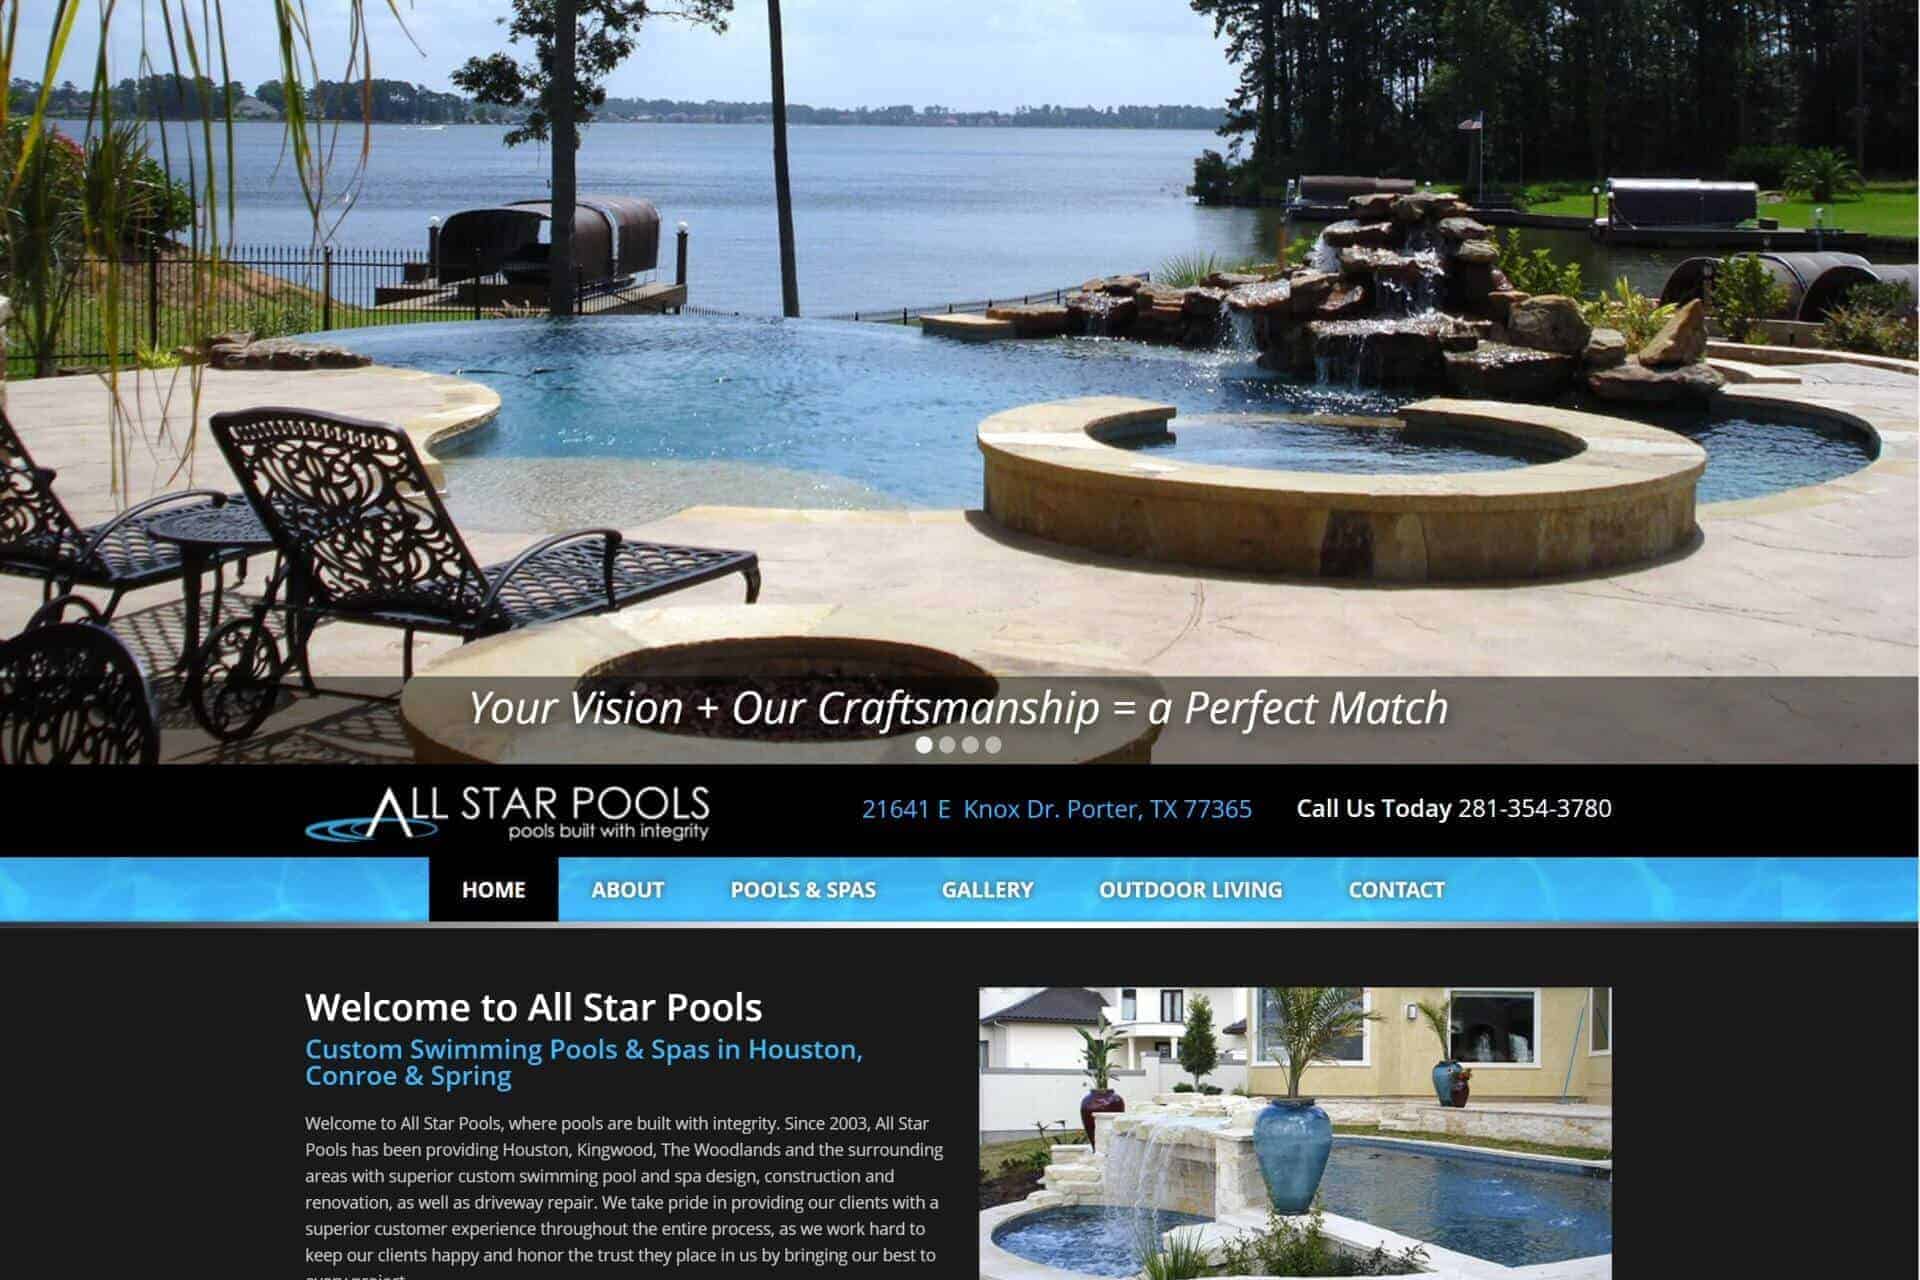 All Star Pools by Glass Act